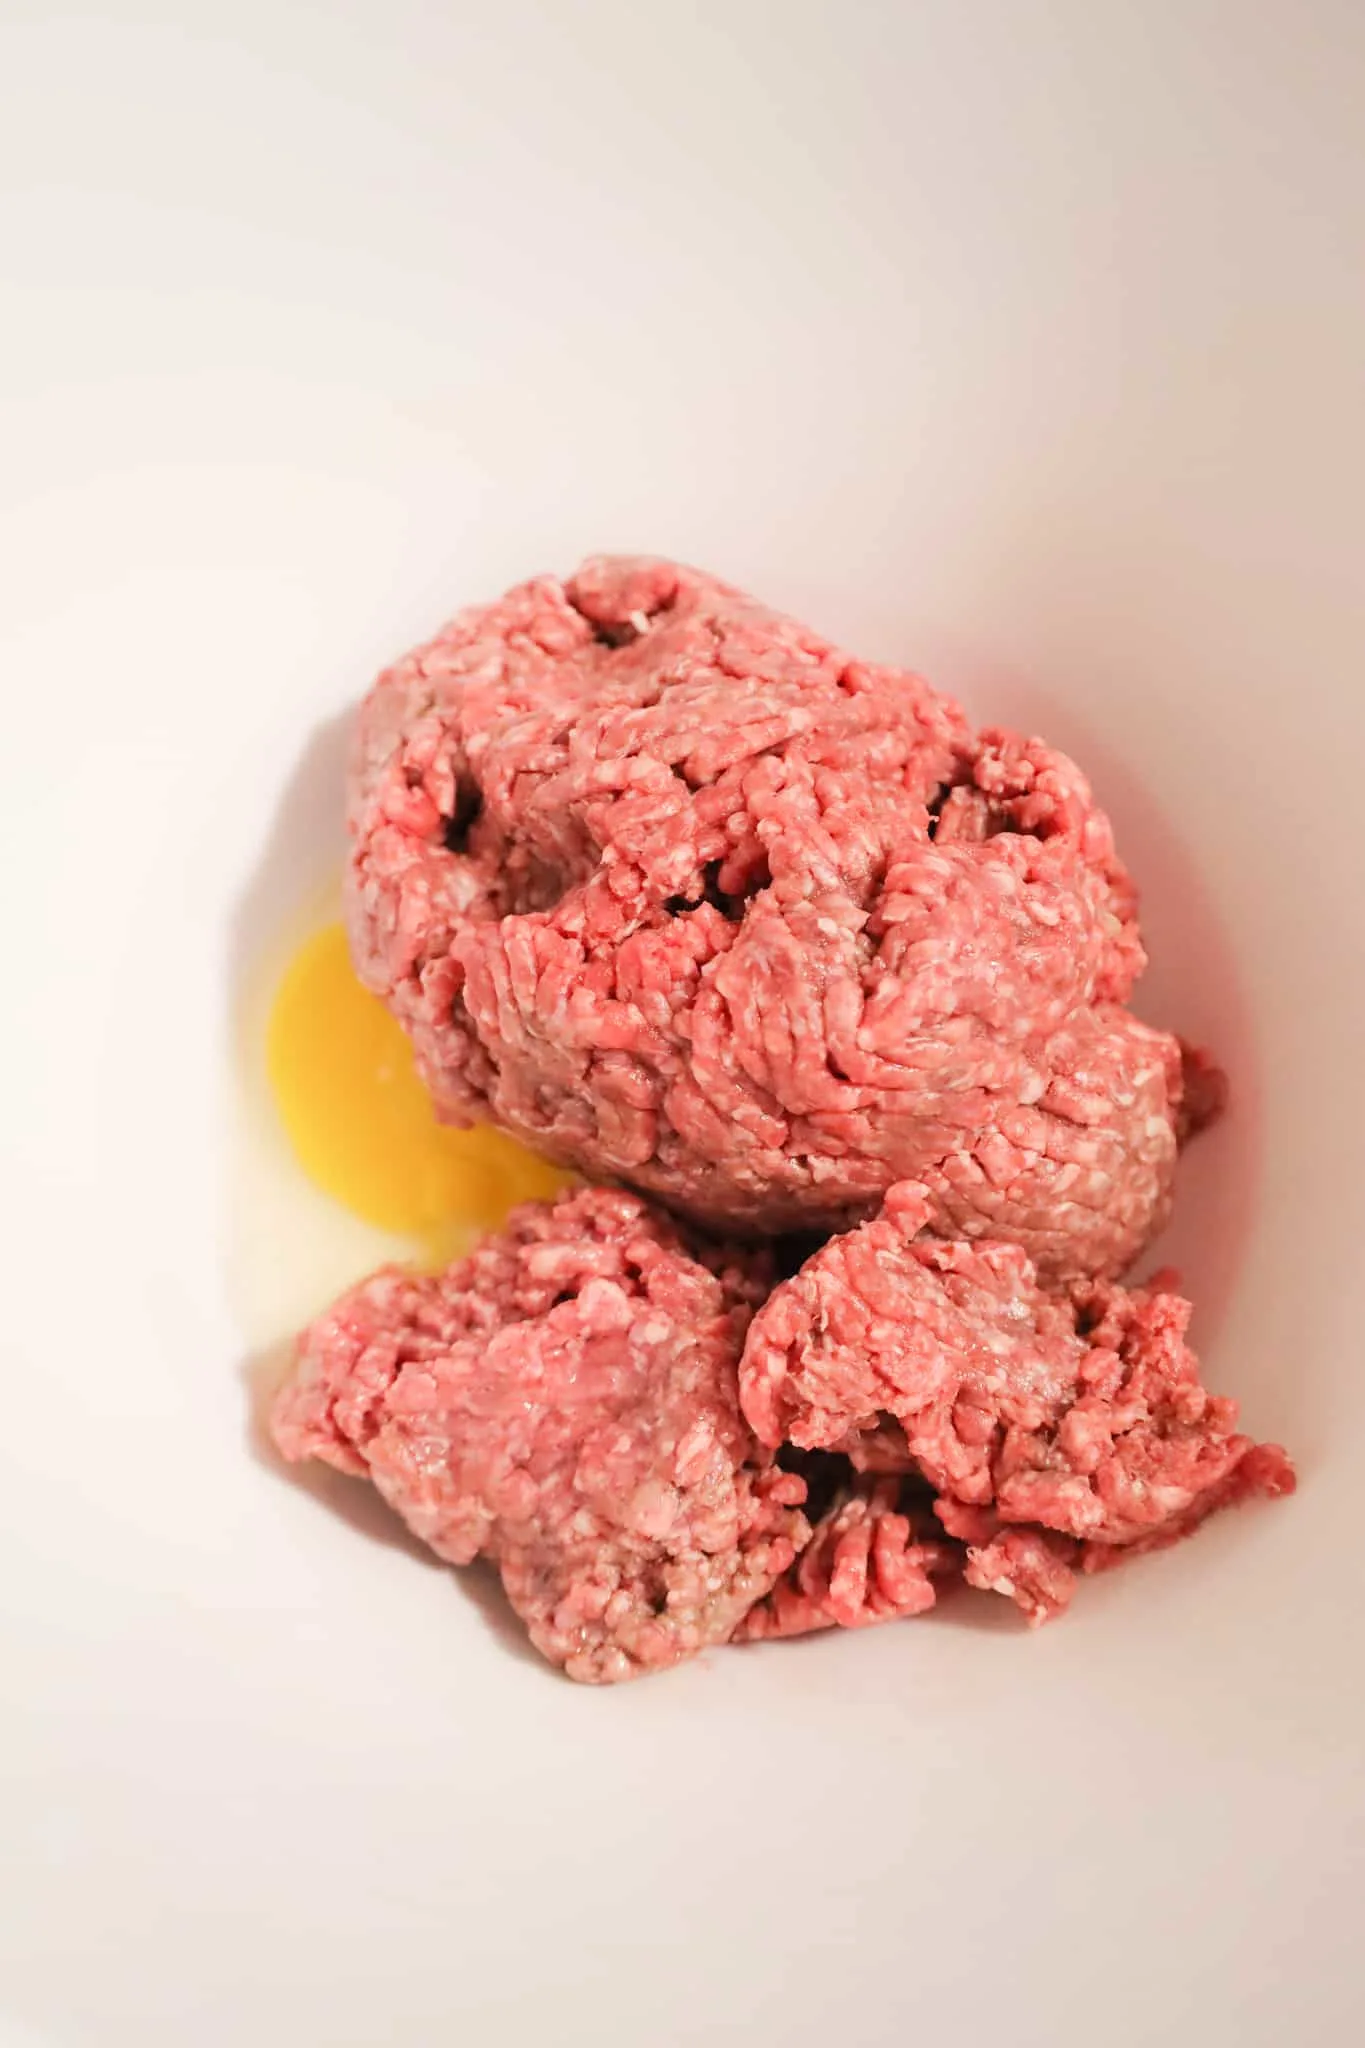 raw ground beef and raw egg in a mixing bowl